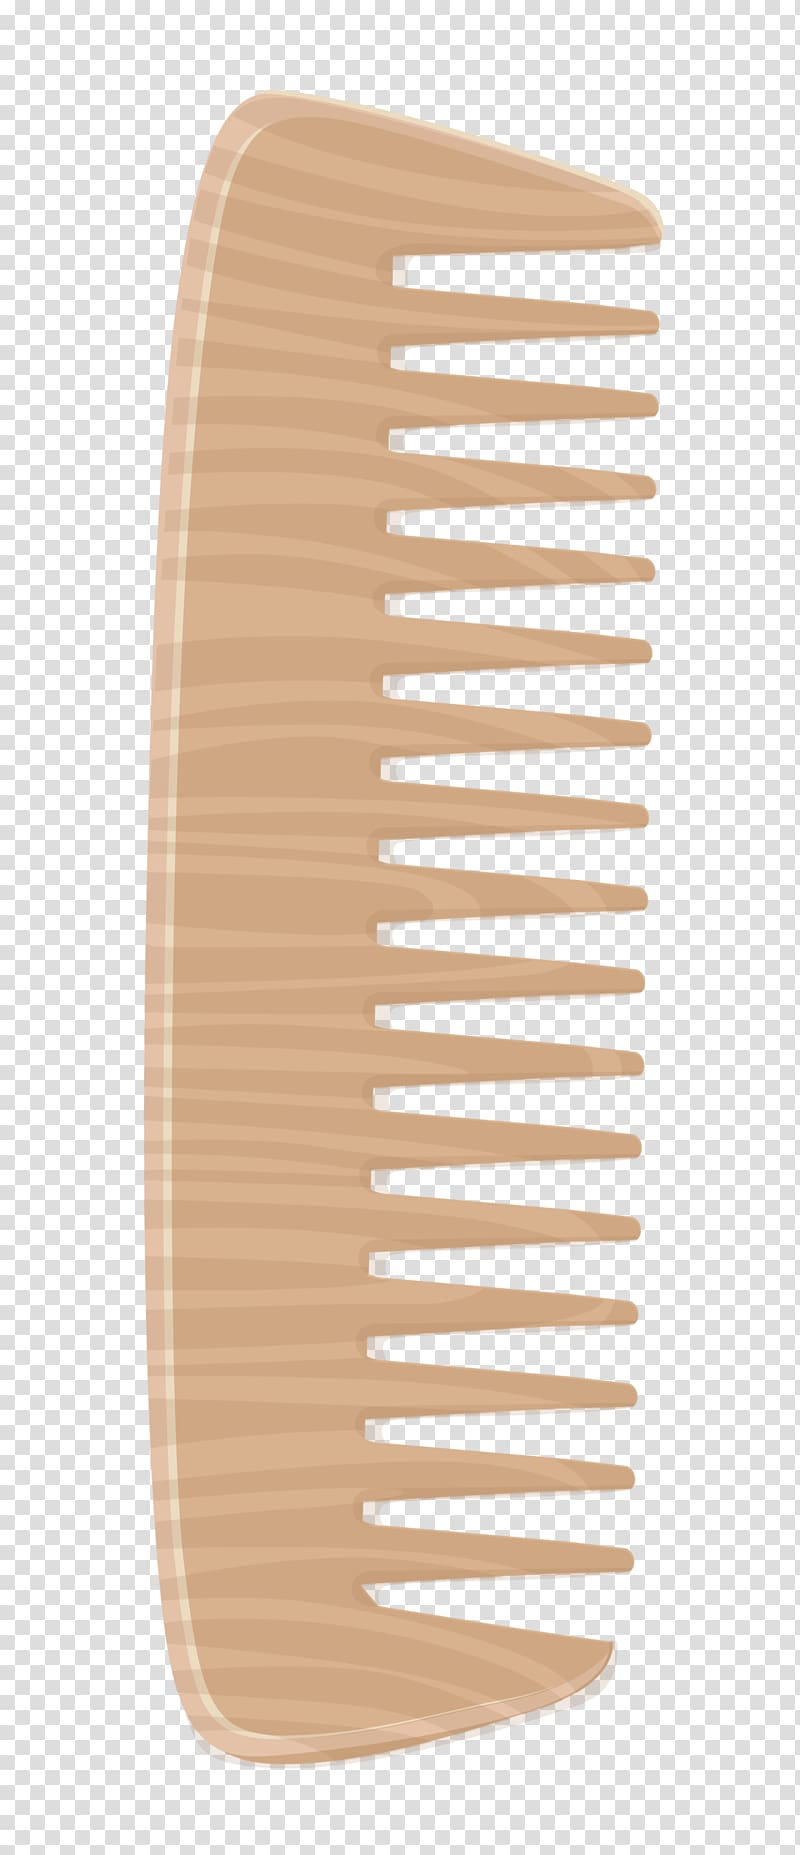 brown hair comb illustration, Comb Hair Beauty Parlour , Wooden Comb transparent background PNG clipart